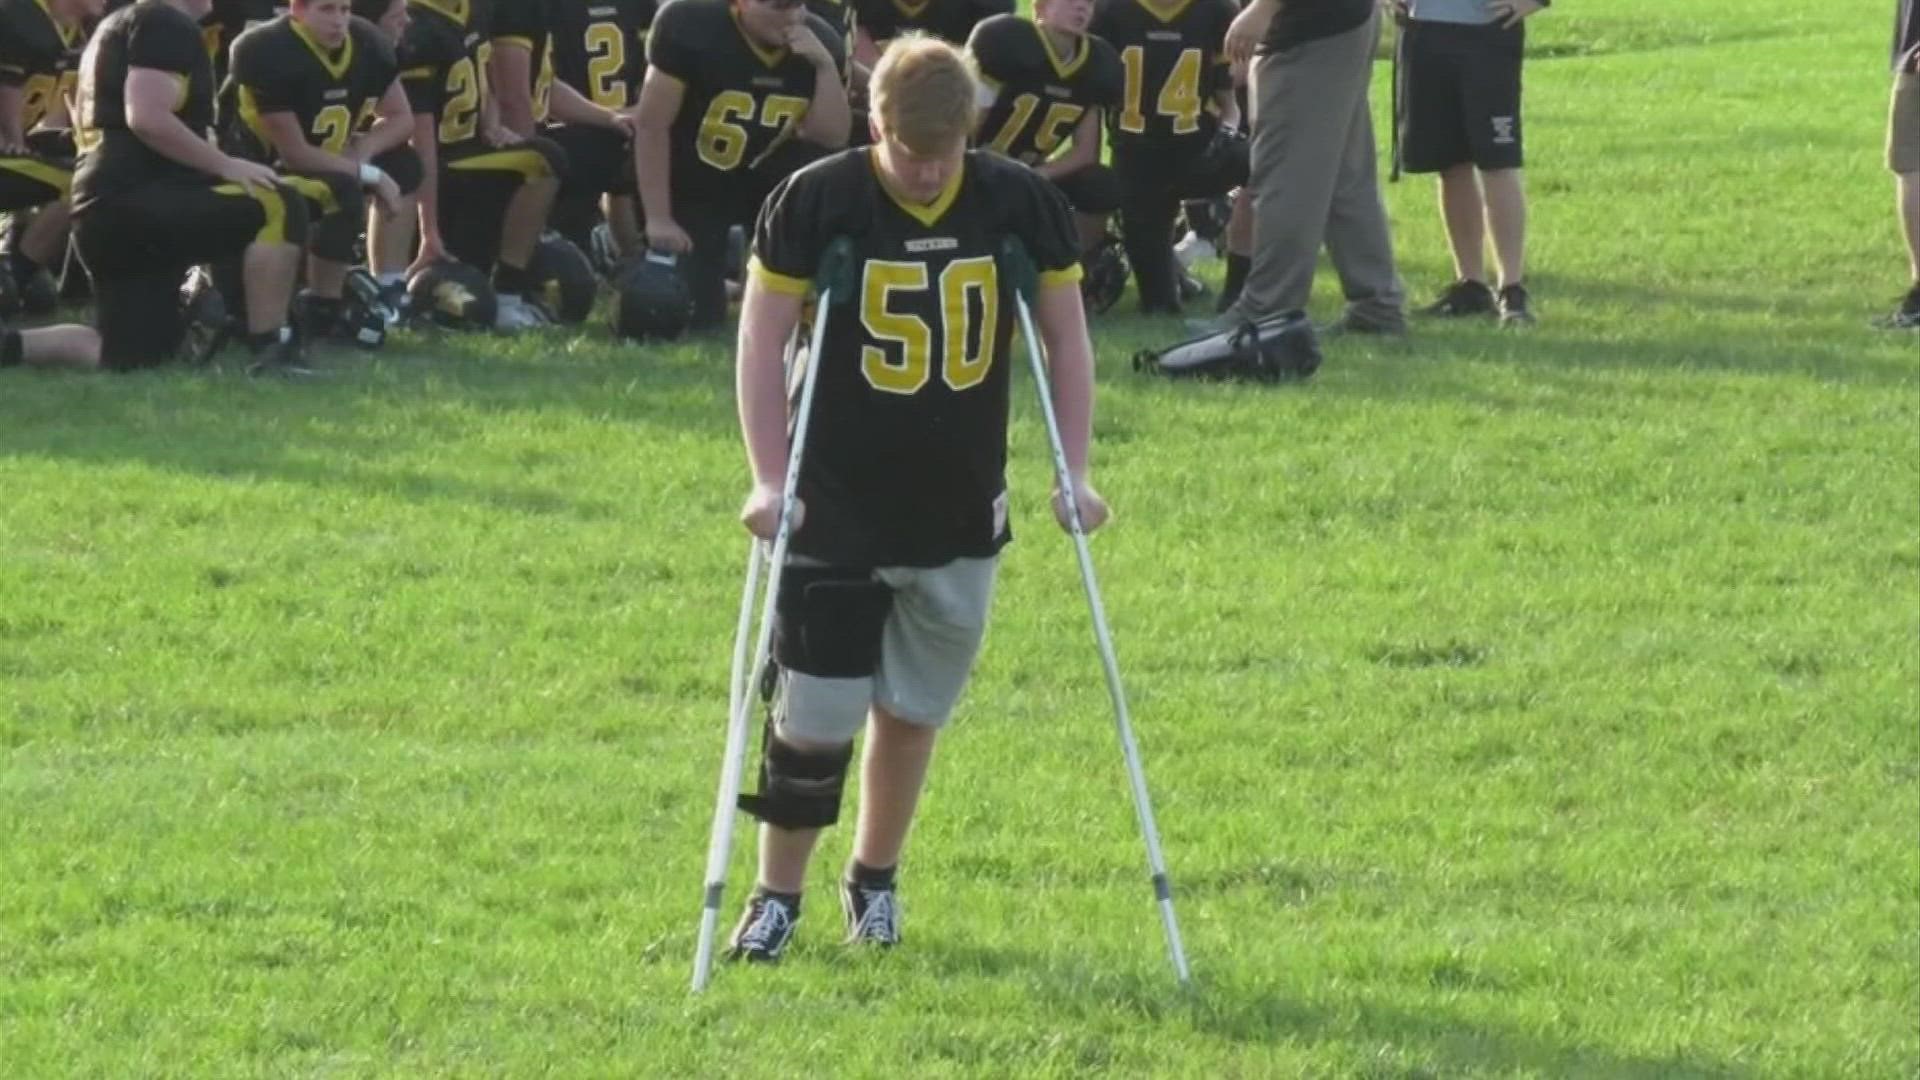 Jacob Joyce, a senior at Watkins Memorial High School, went against the odds to continue playing with his football team.